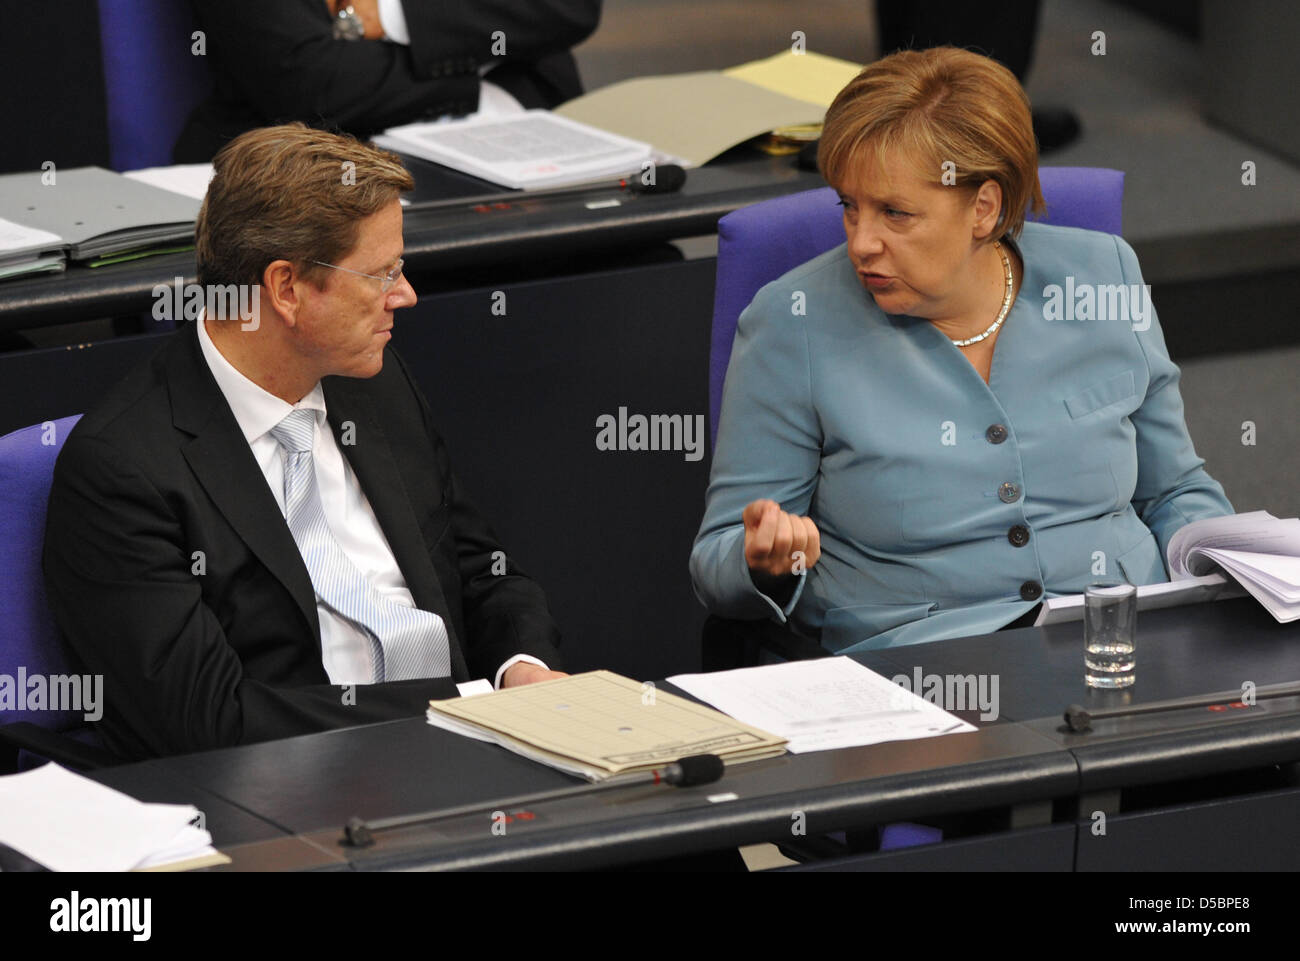 German Chancellor Angela Merkel and German Foreign Minister and Vice Chancellor Guido Westerwelle attend a Bundestag (German Parliament) session at the Reichstag in Berlin, Germany, 14 September 2010. The German Parliament is discussing the controversial 2011 budget, which entails spending cuts adding up to 12 billion euros, mainly in social services. Photo: RAINER JENSEN Stock Photo